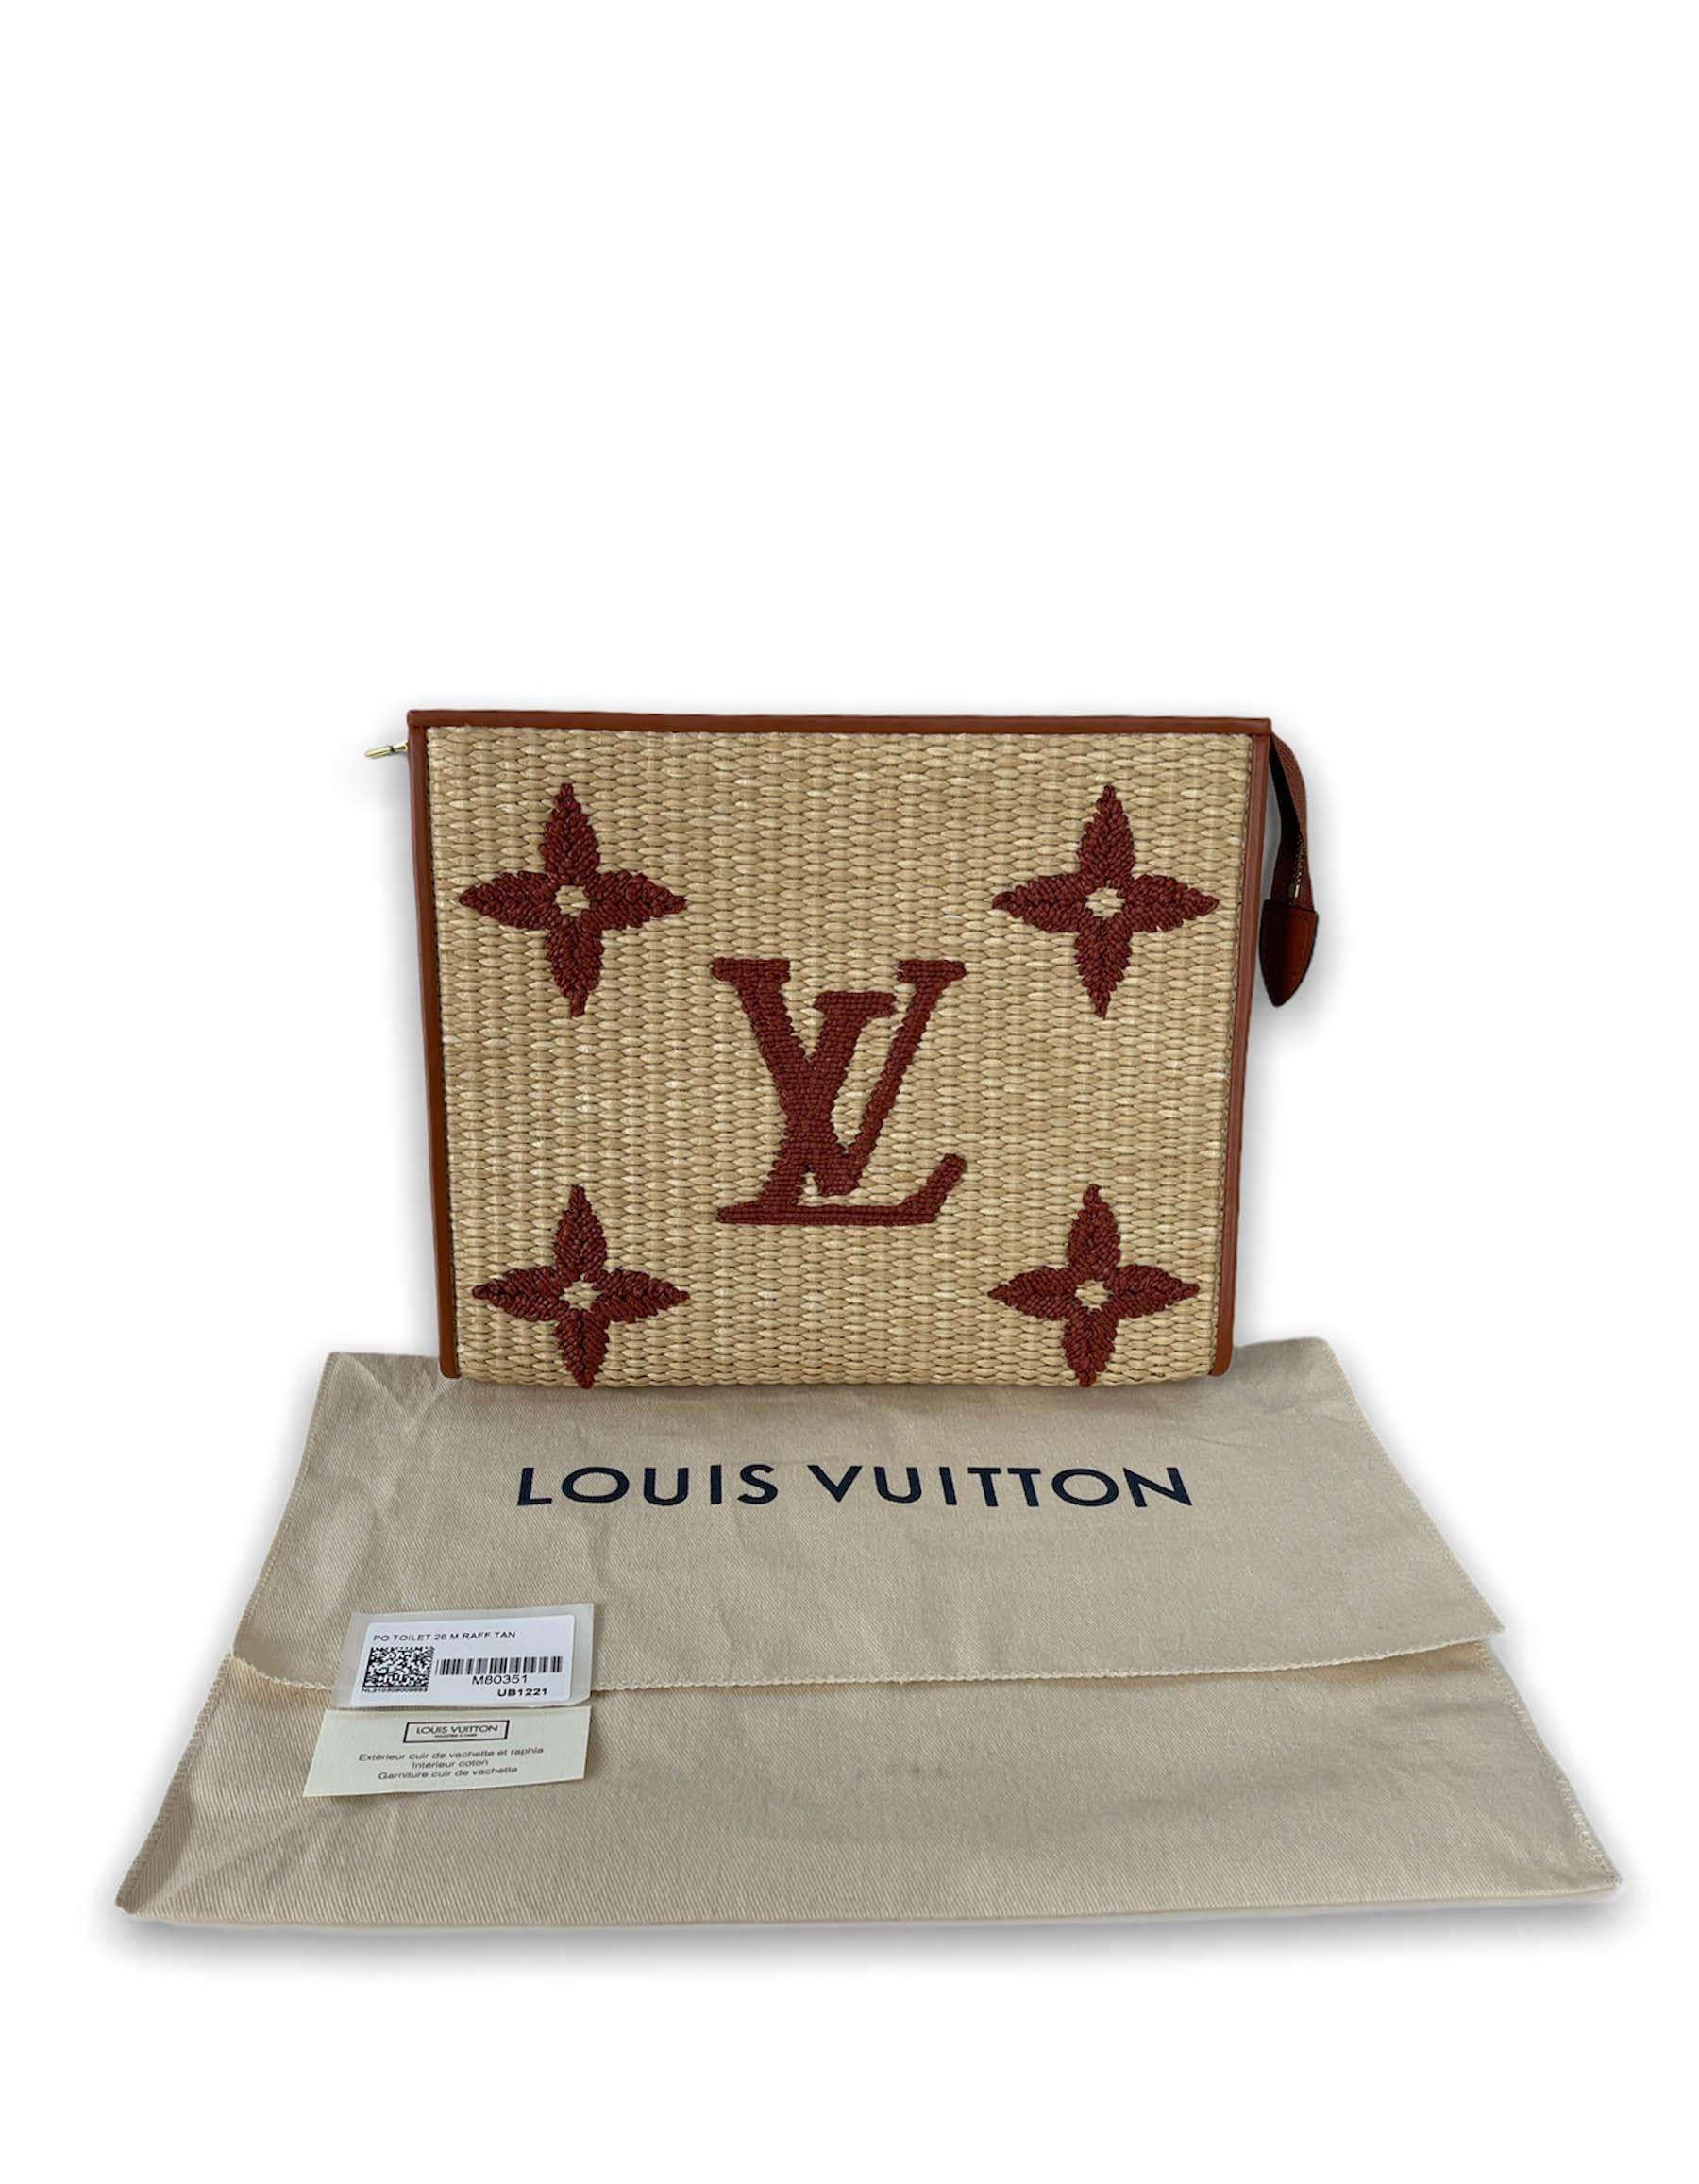 Louis Vuitton SOLD OUT Monogram Giant Raffia Toiletry 26 Cosmetic Bag

Year of Production: 2021
Color: Tan & brown
Hardware: Goldtone
Materials: Sustainable raffia-like woven textile and cowhide leather
Lining: Striped textile
Closure/Opening: Zip